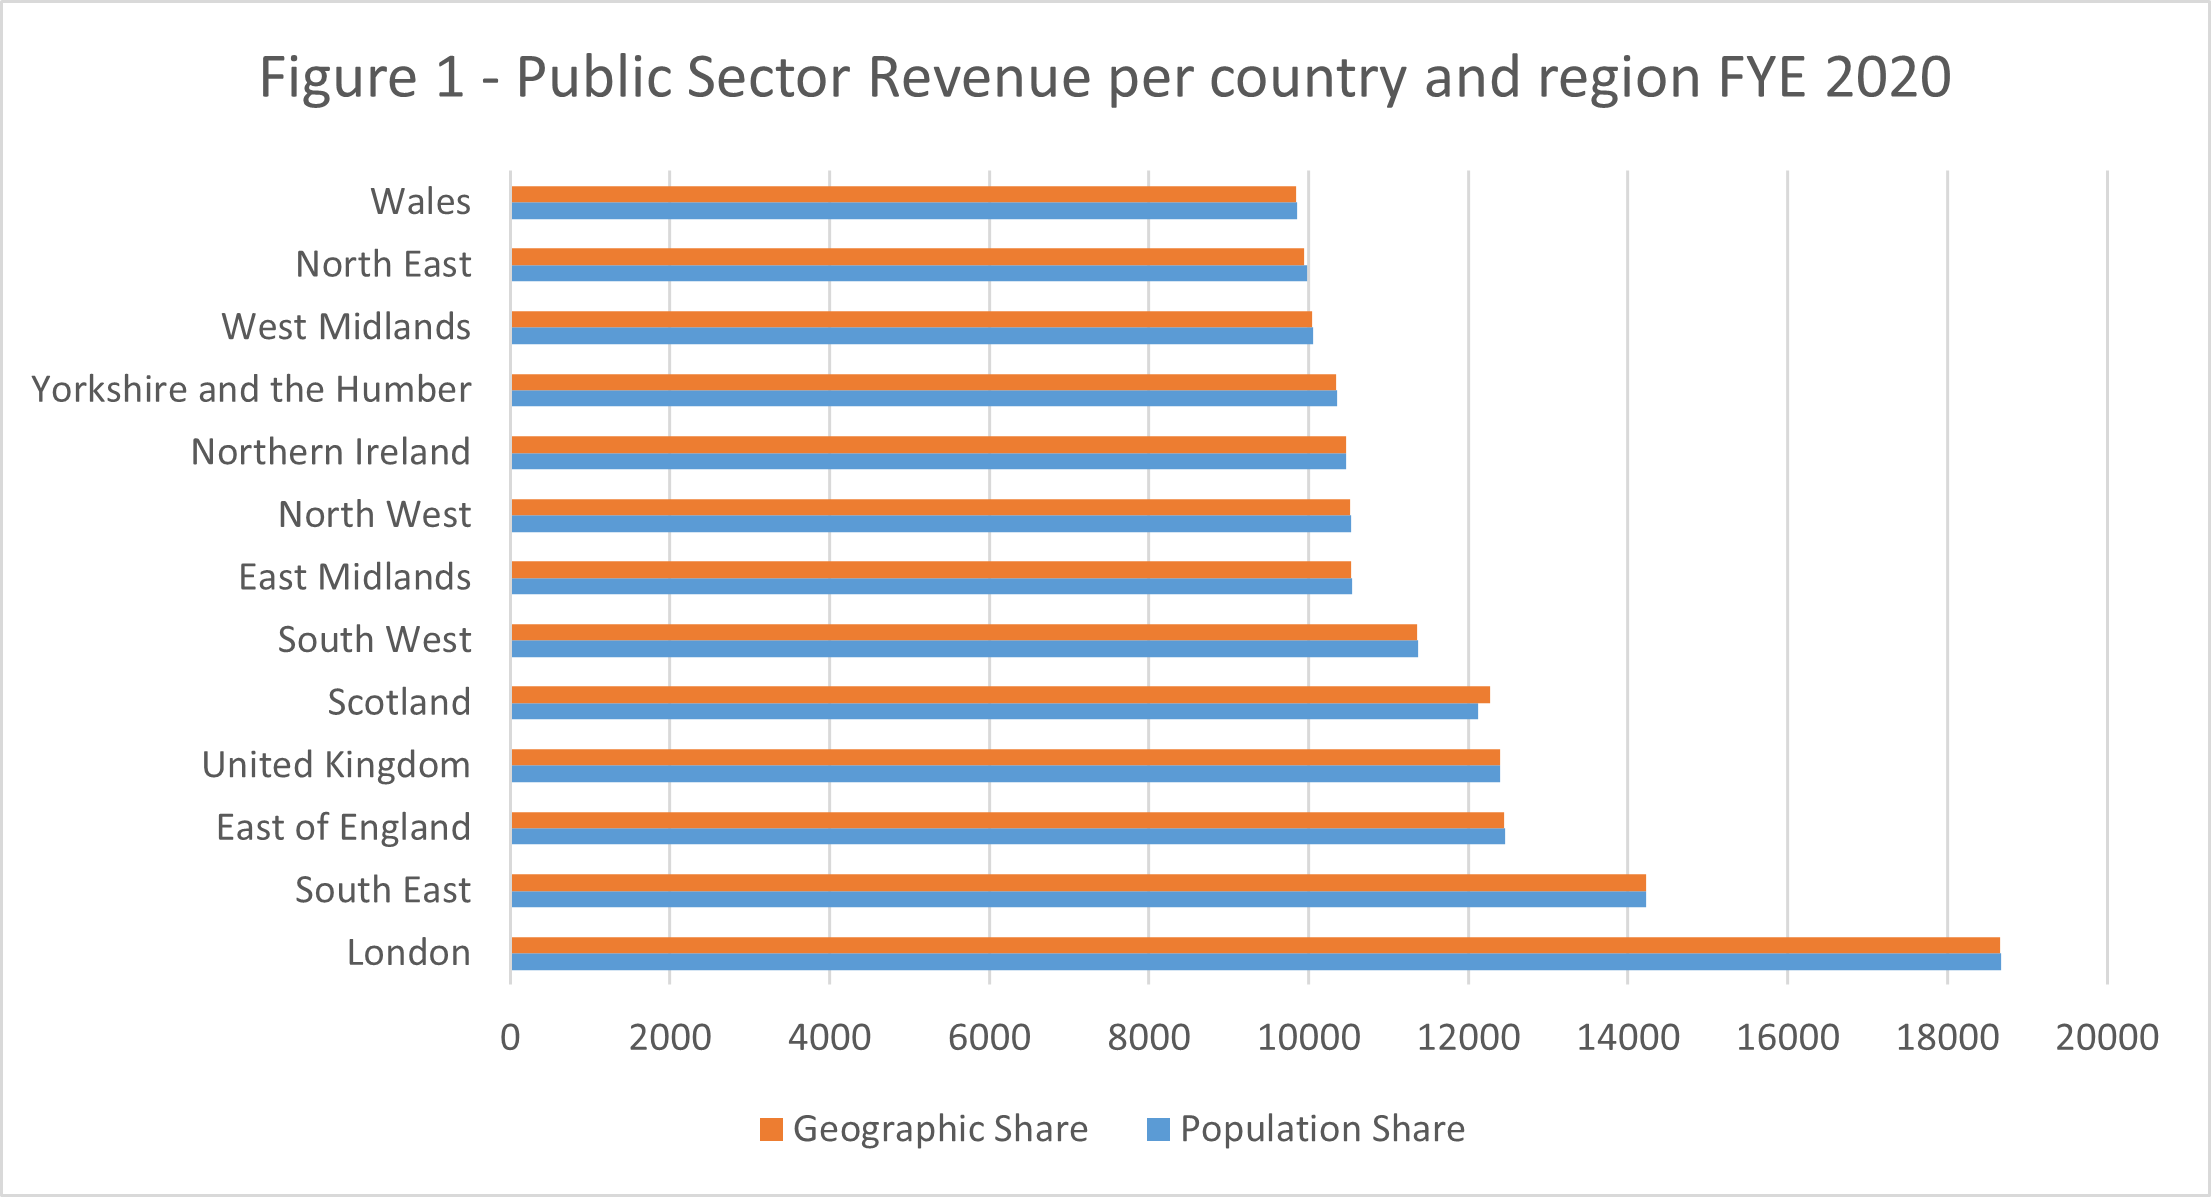 A chart showing the public sector revenue distribution based on geographical and population share of different areas of the UK